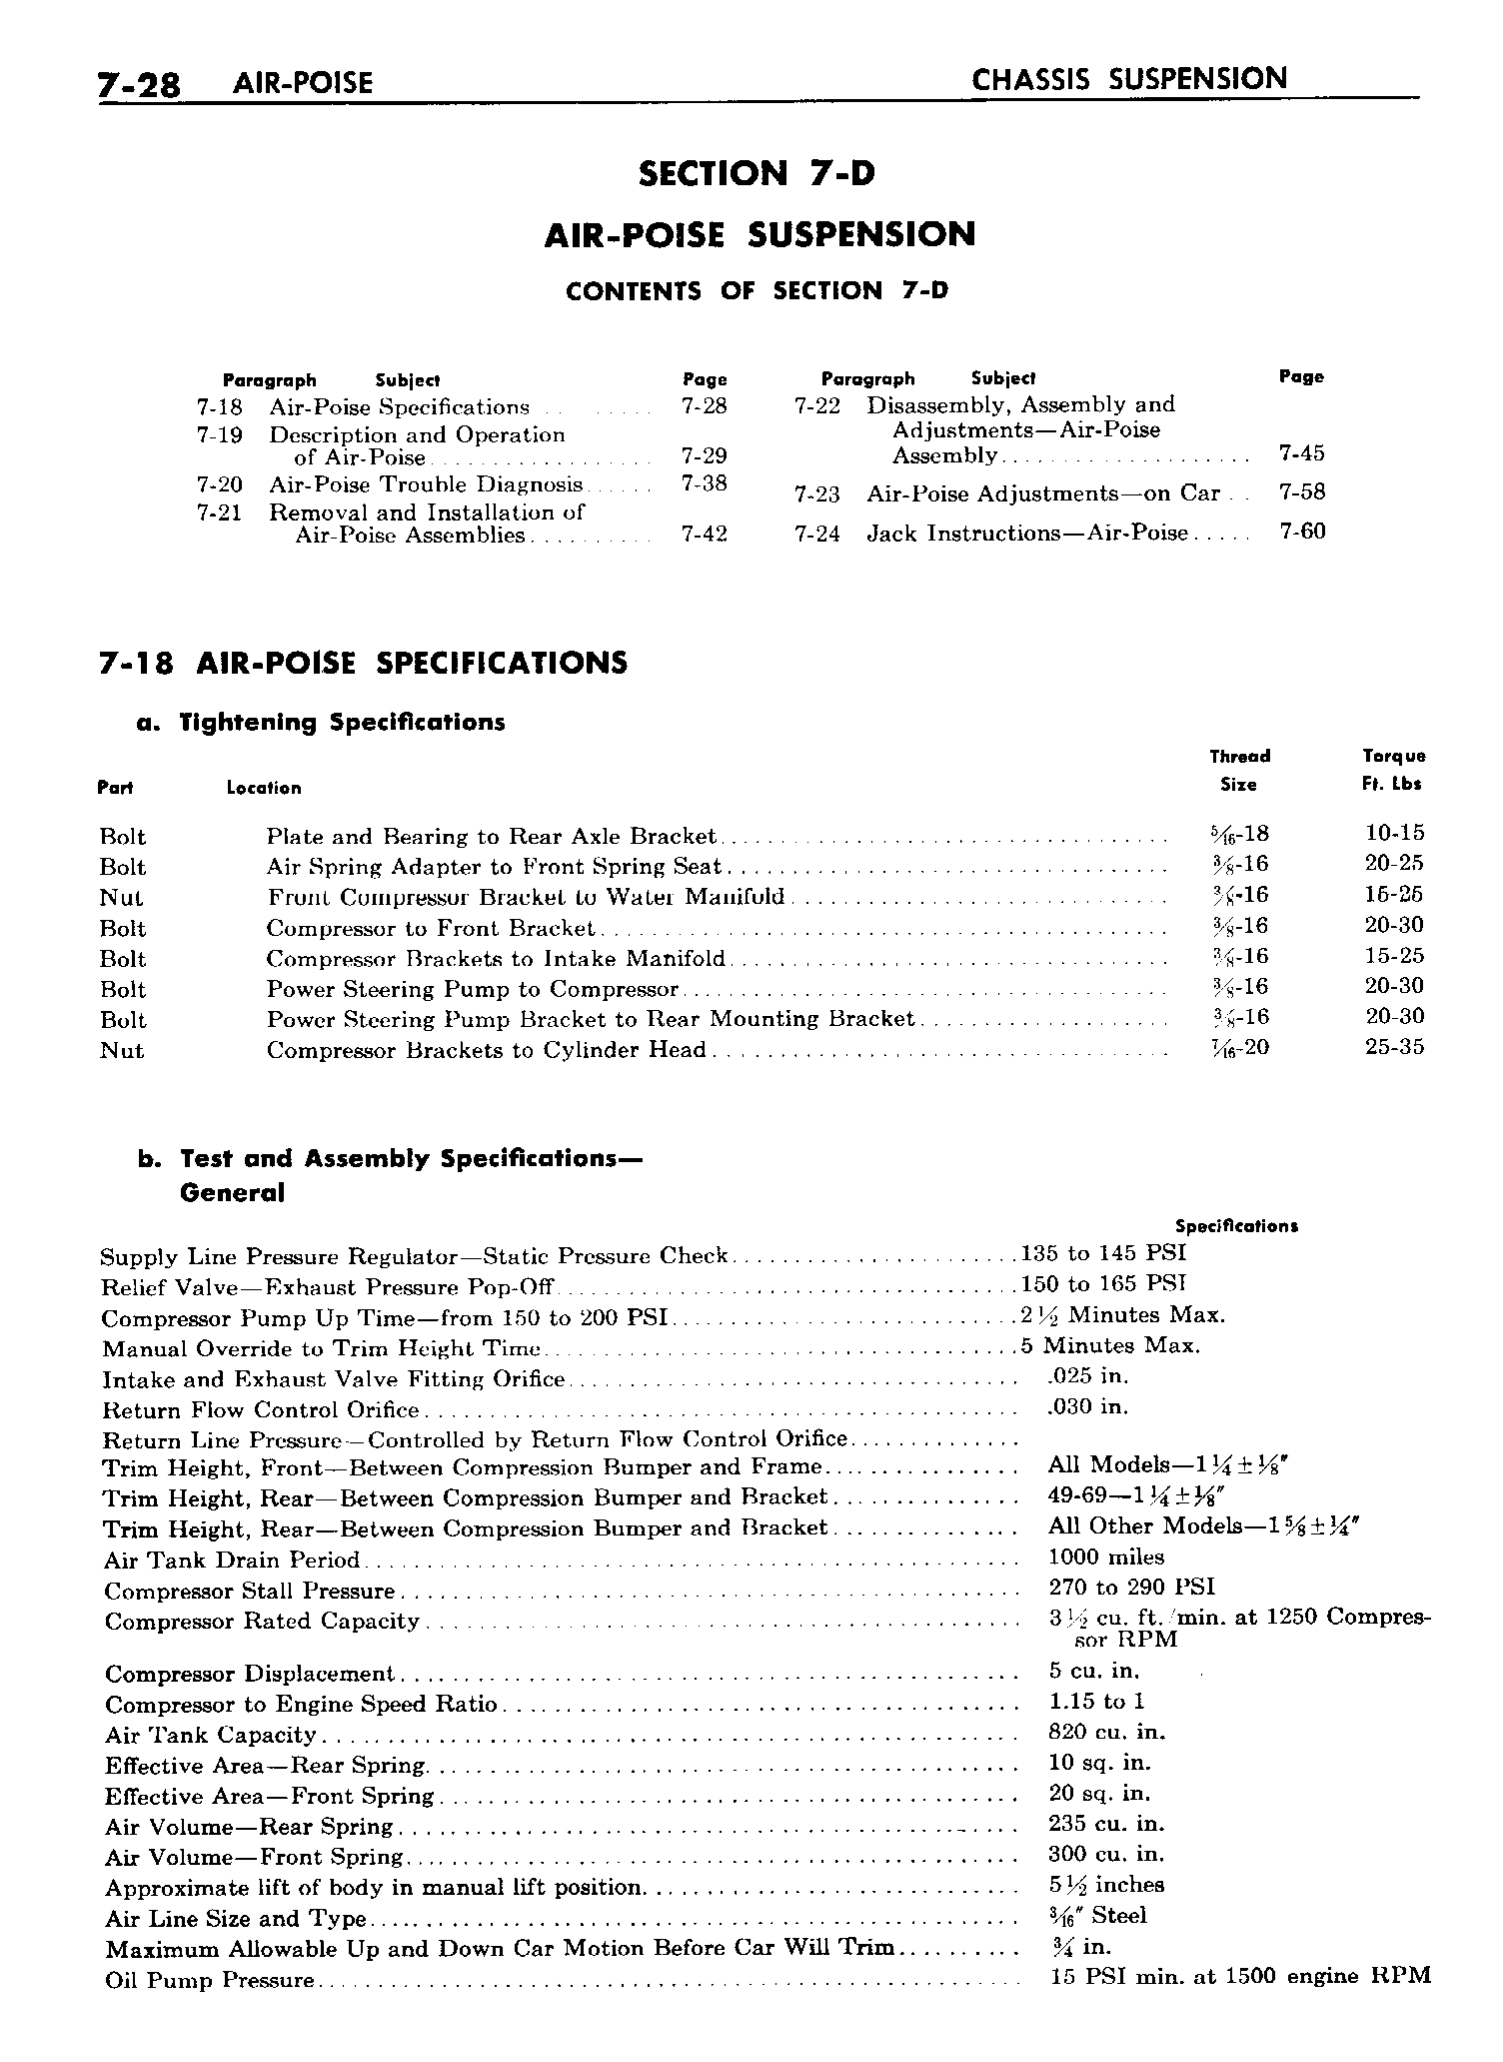 n_08 1958 Buick Shop Manual - Chassis Suspension_28.jpg